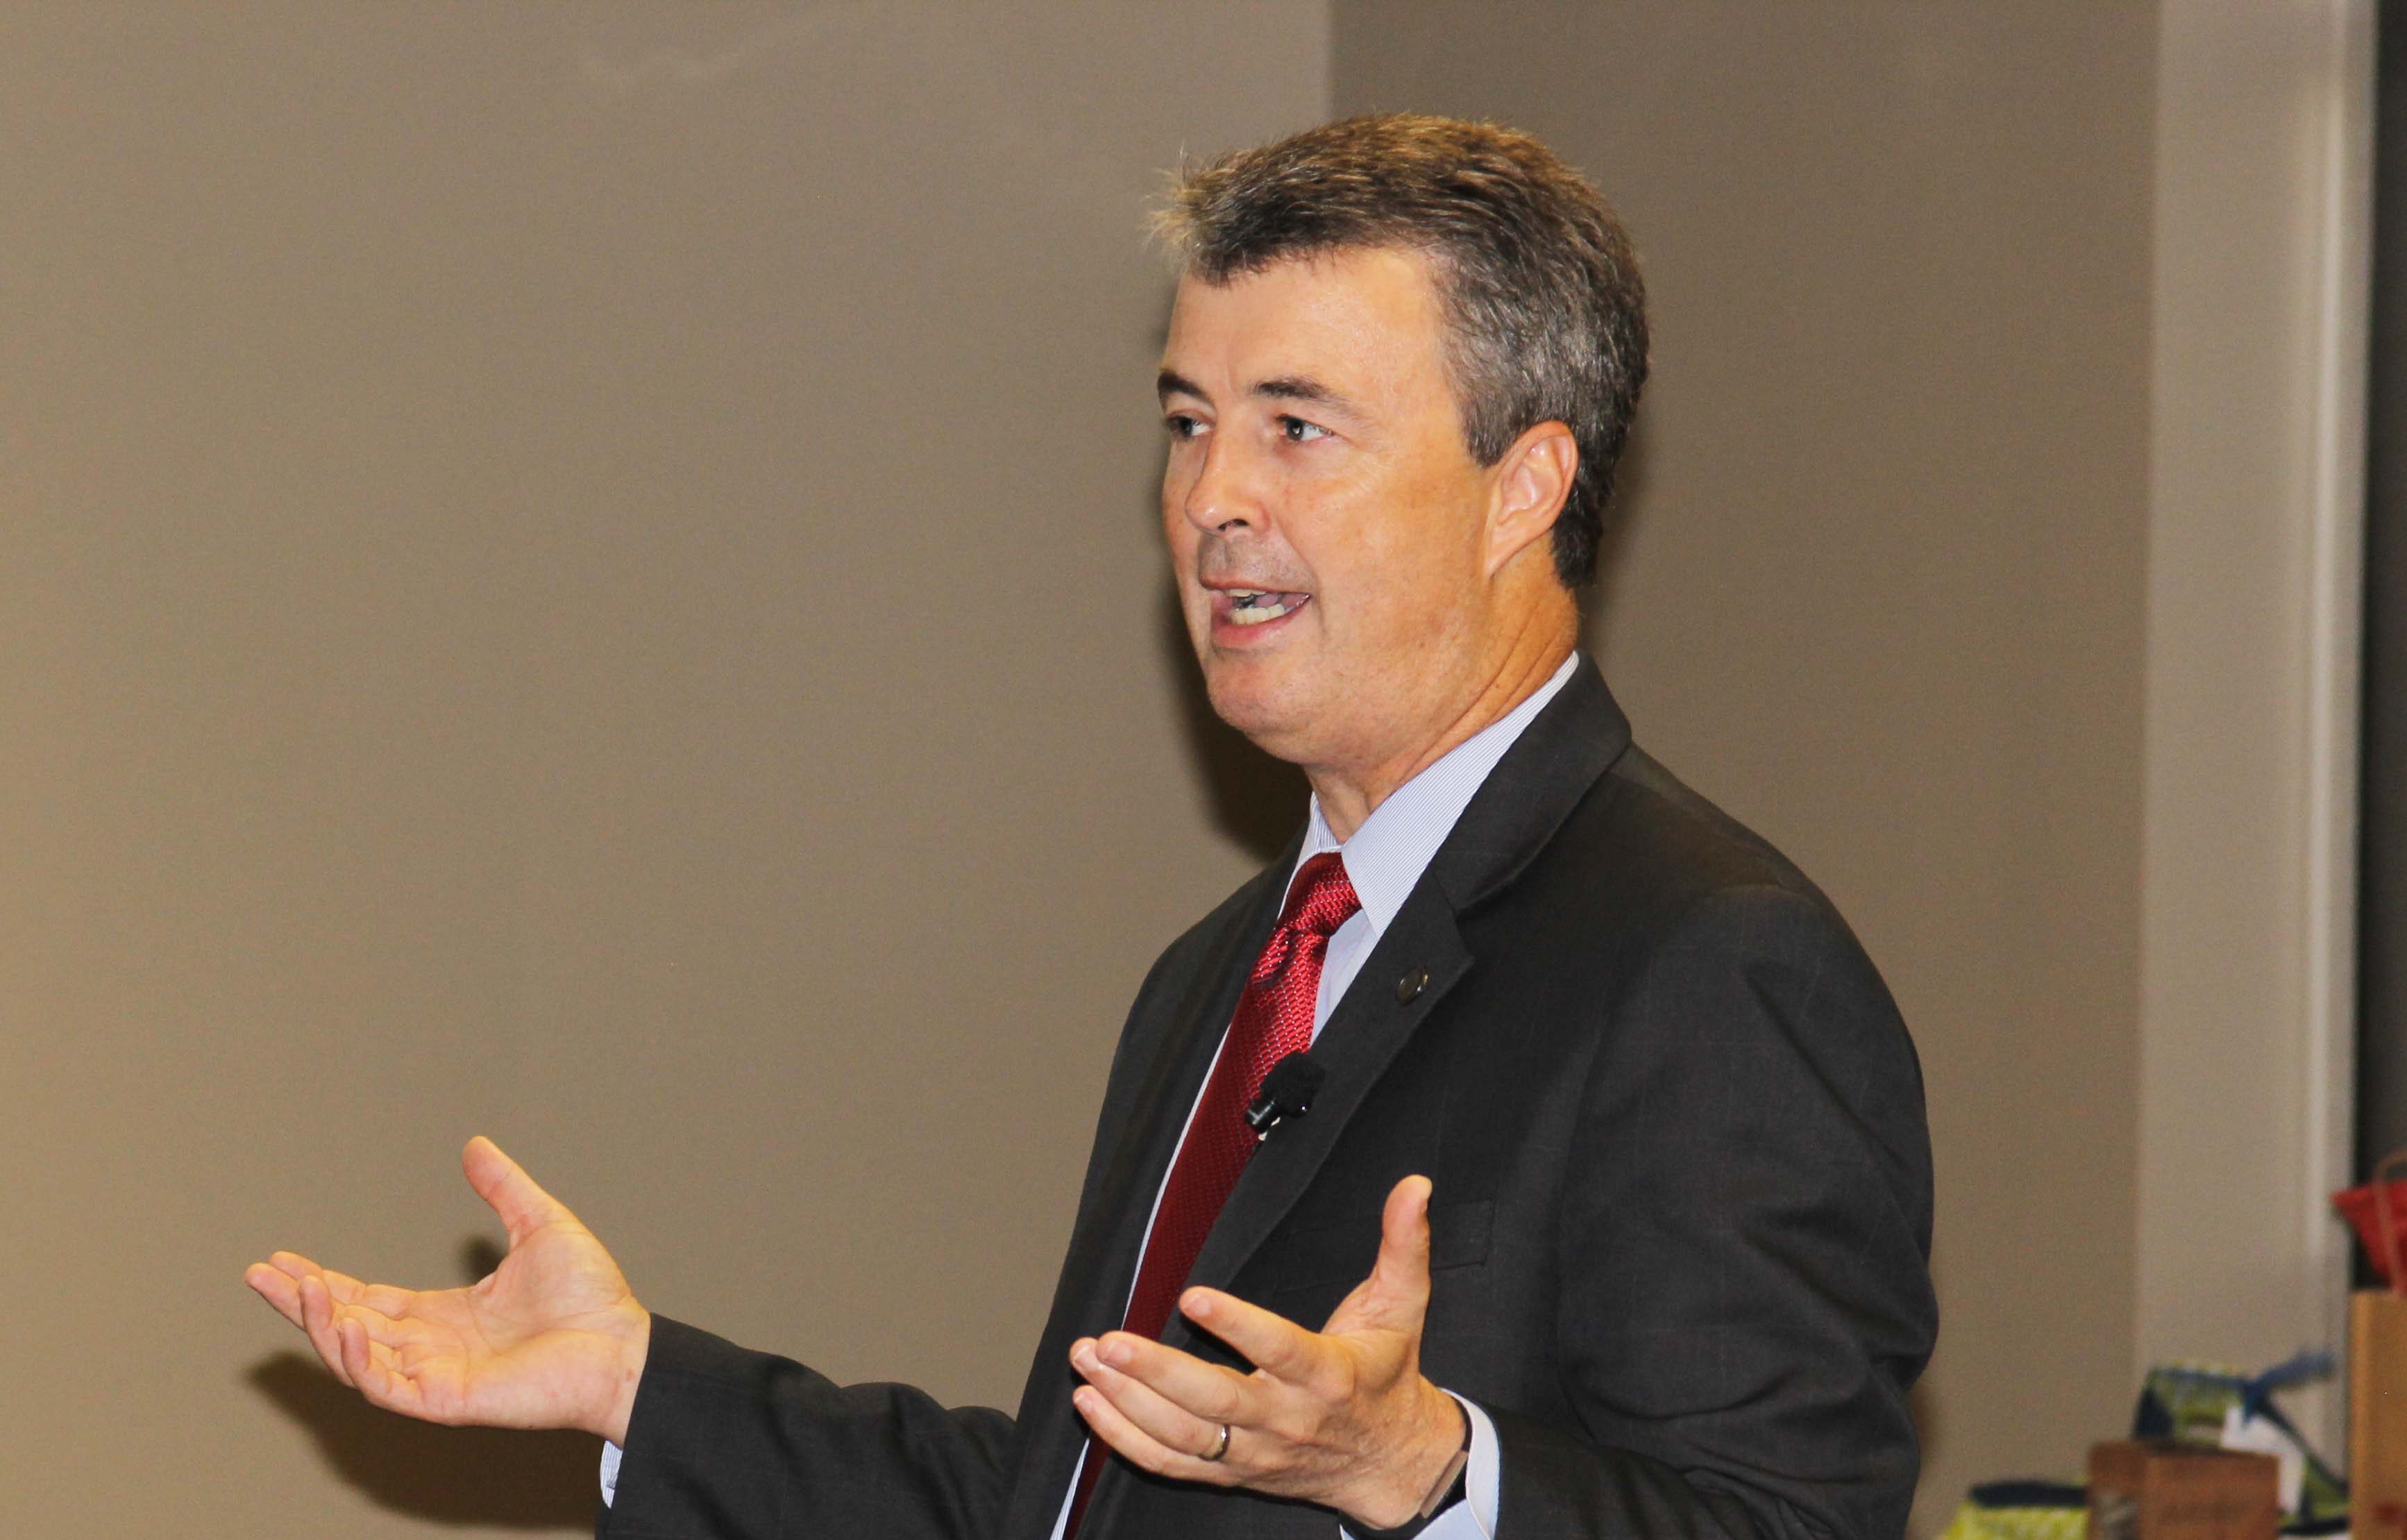 Attorney general speaks at Trussville Area of Commerce luncheon